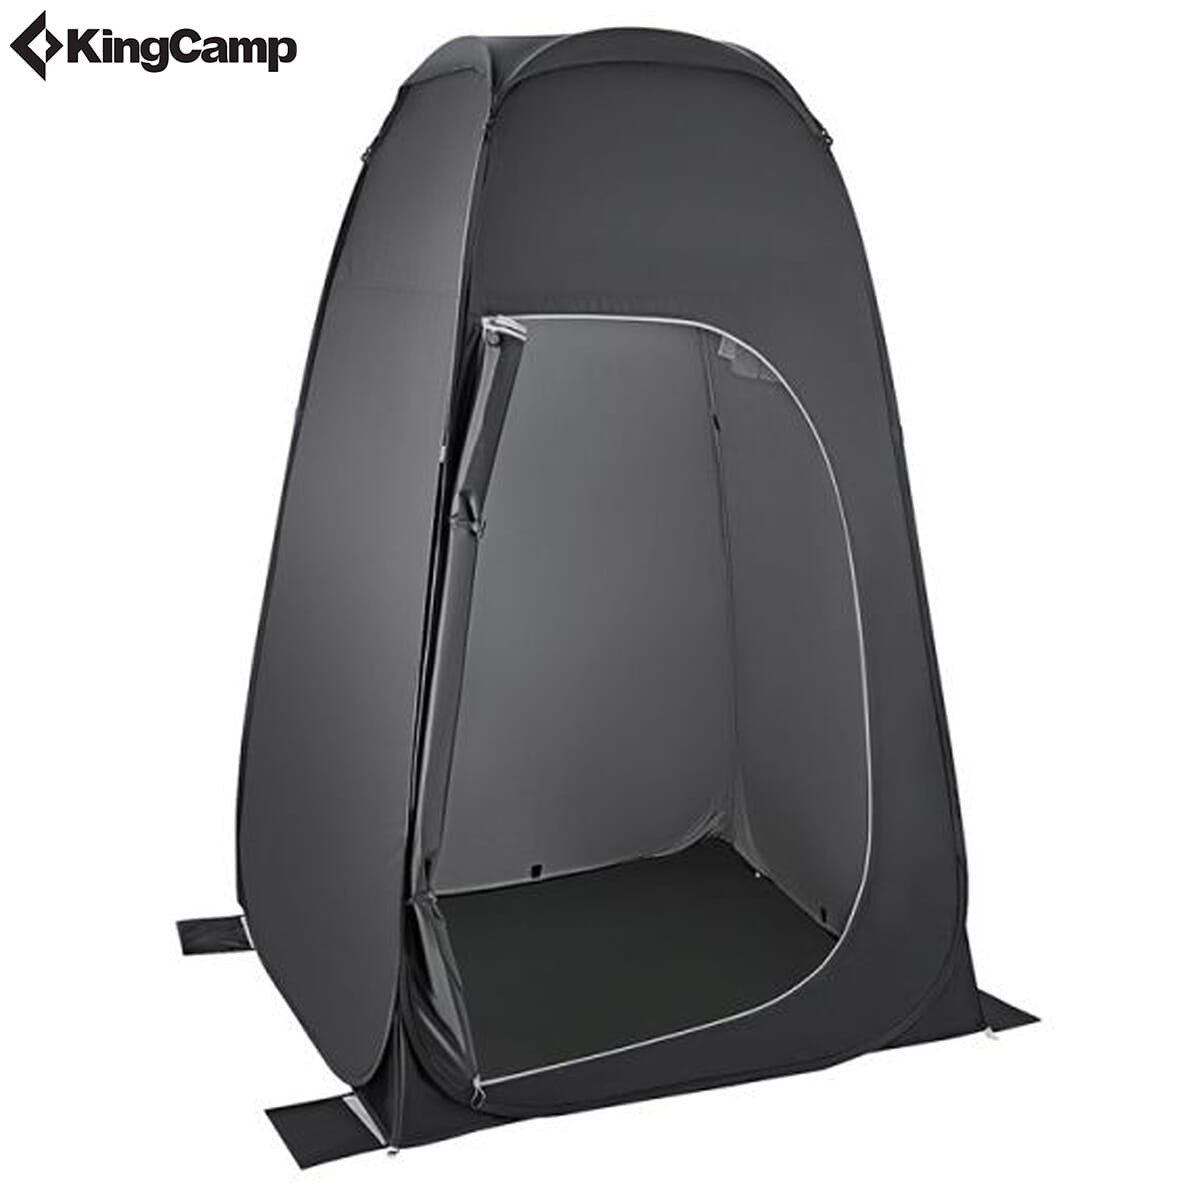 KingCamp Pop up Shower Tent, Privacy Tent, Changing Room, Toilet for Camp